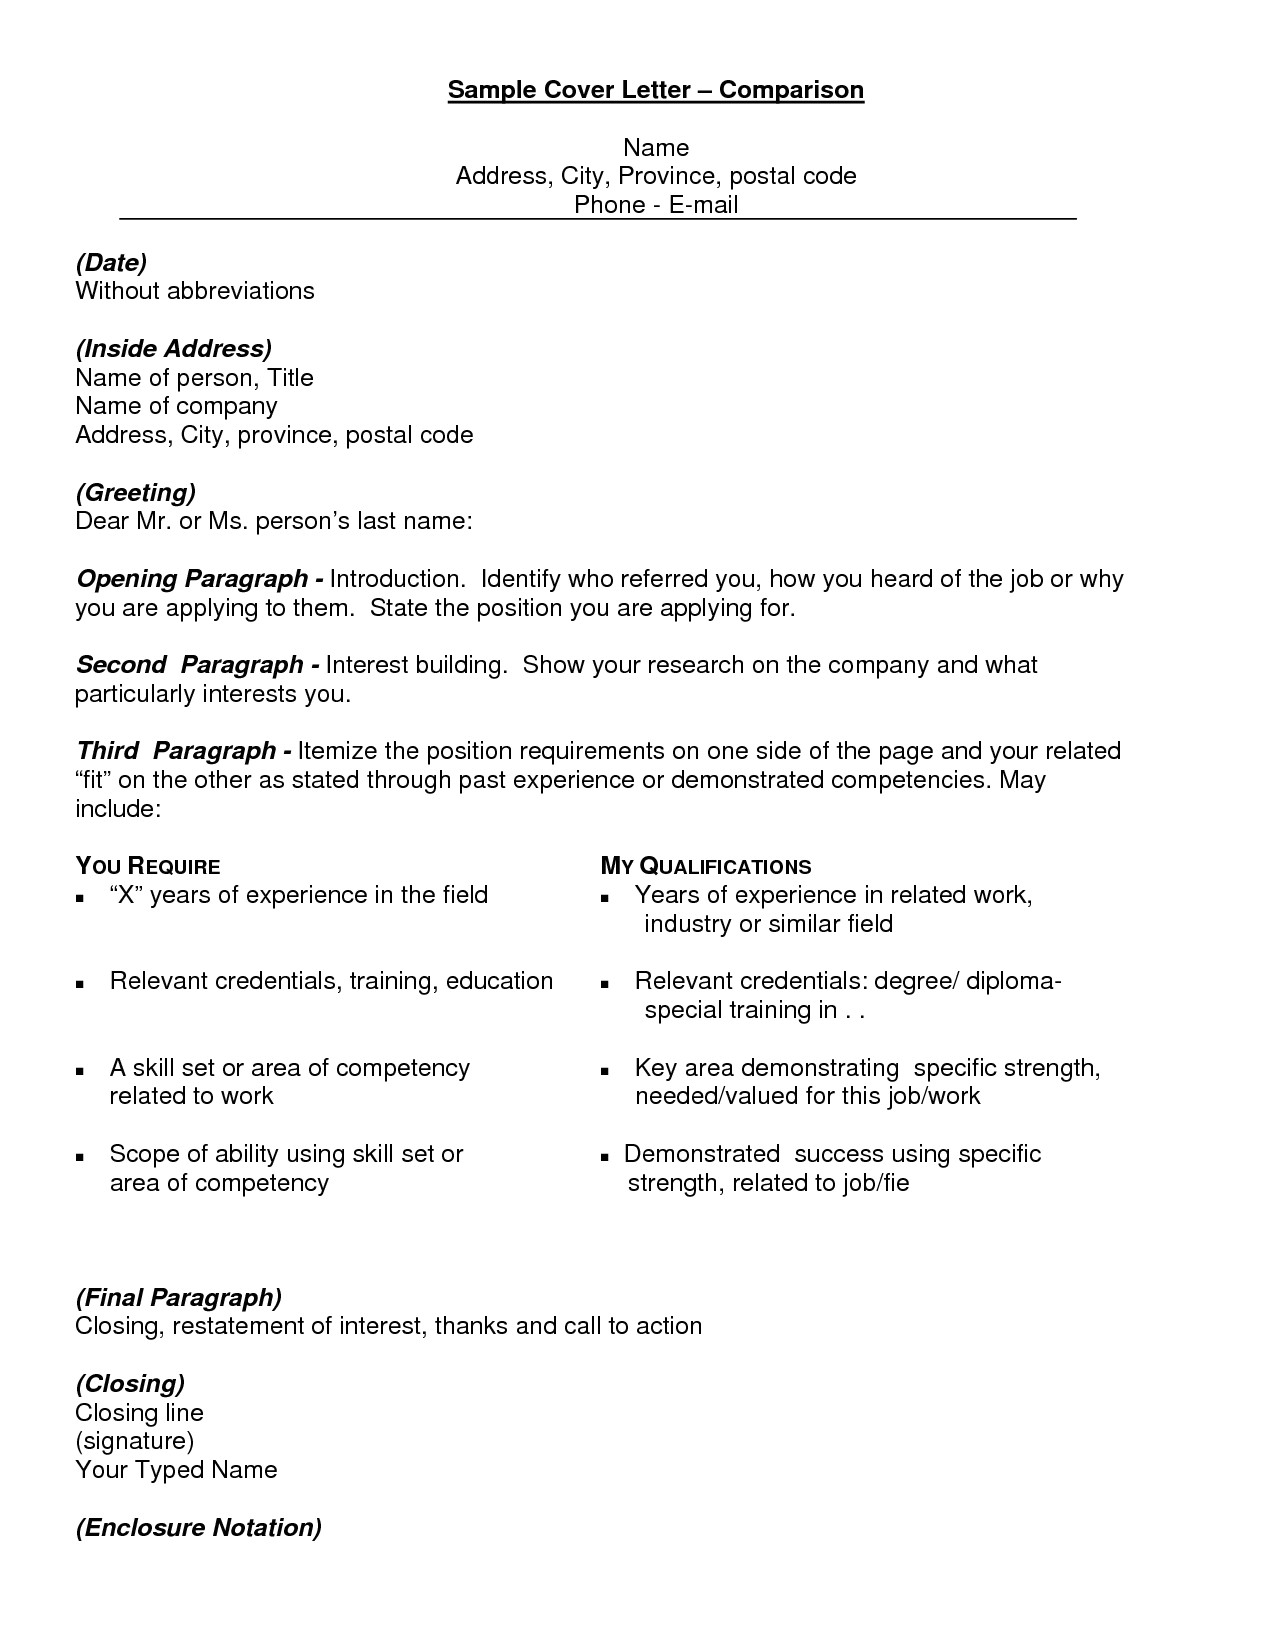 closing line cover letter